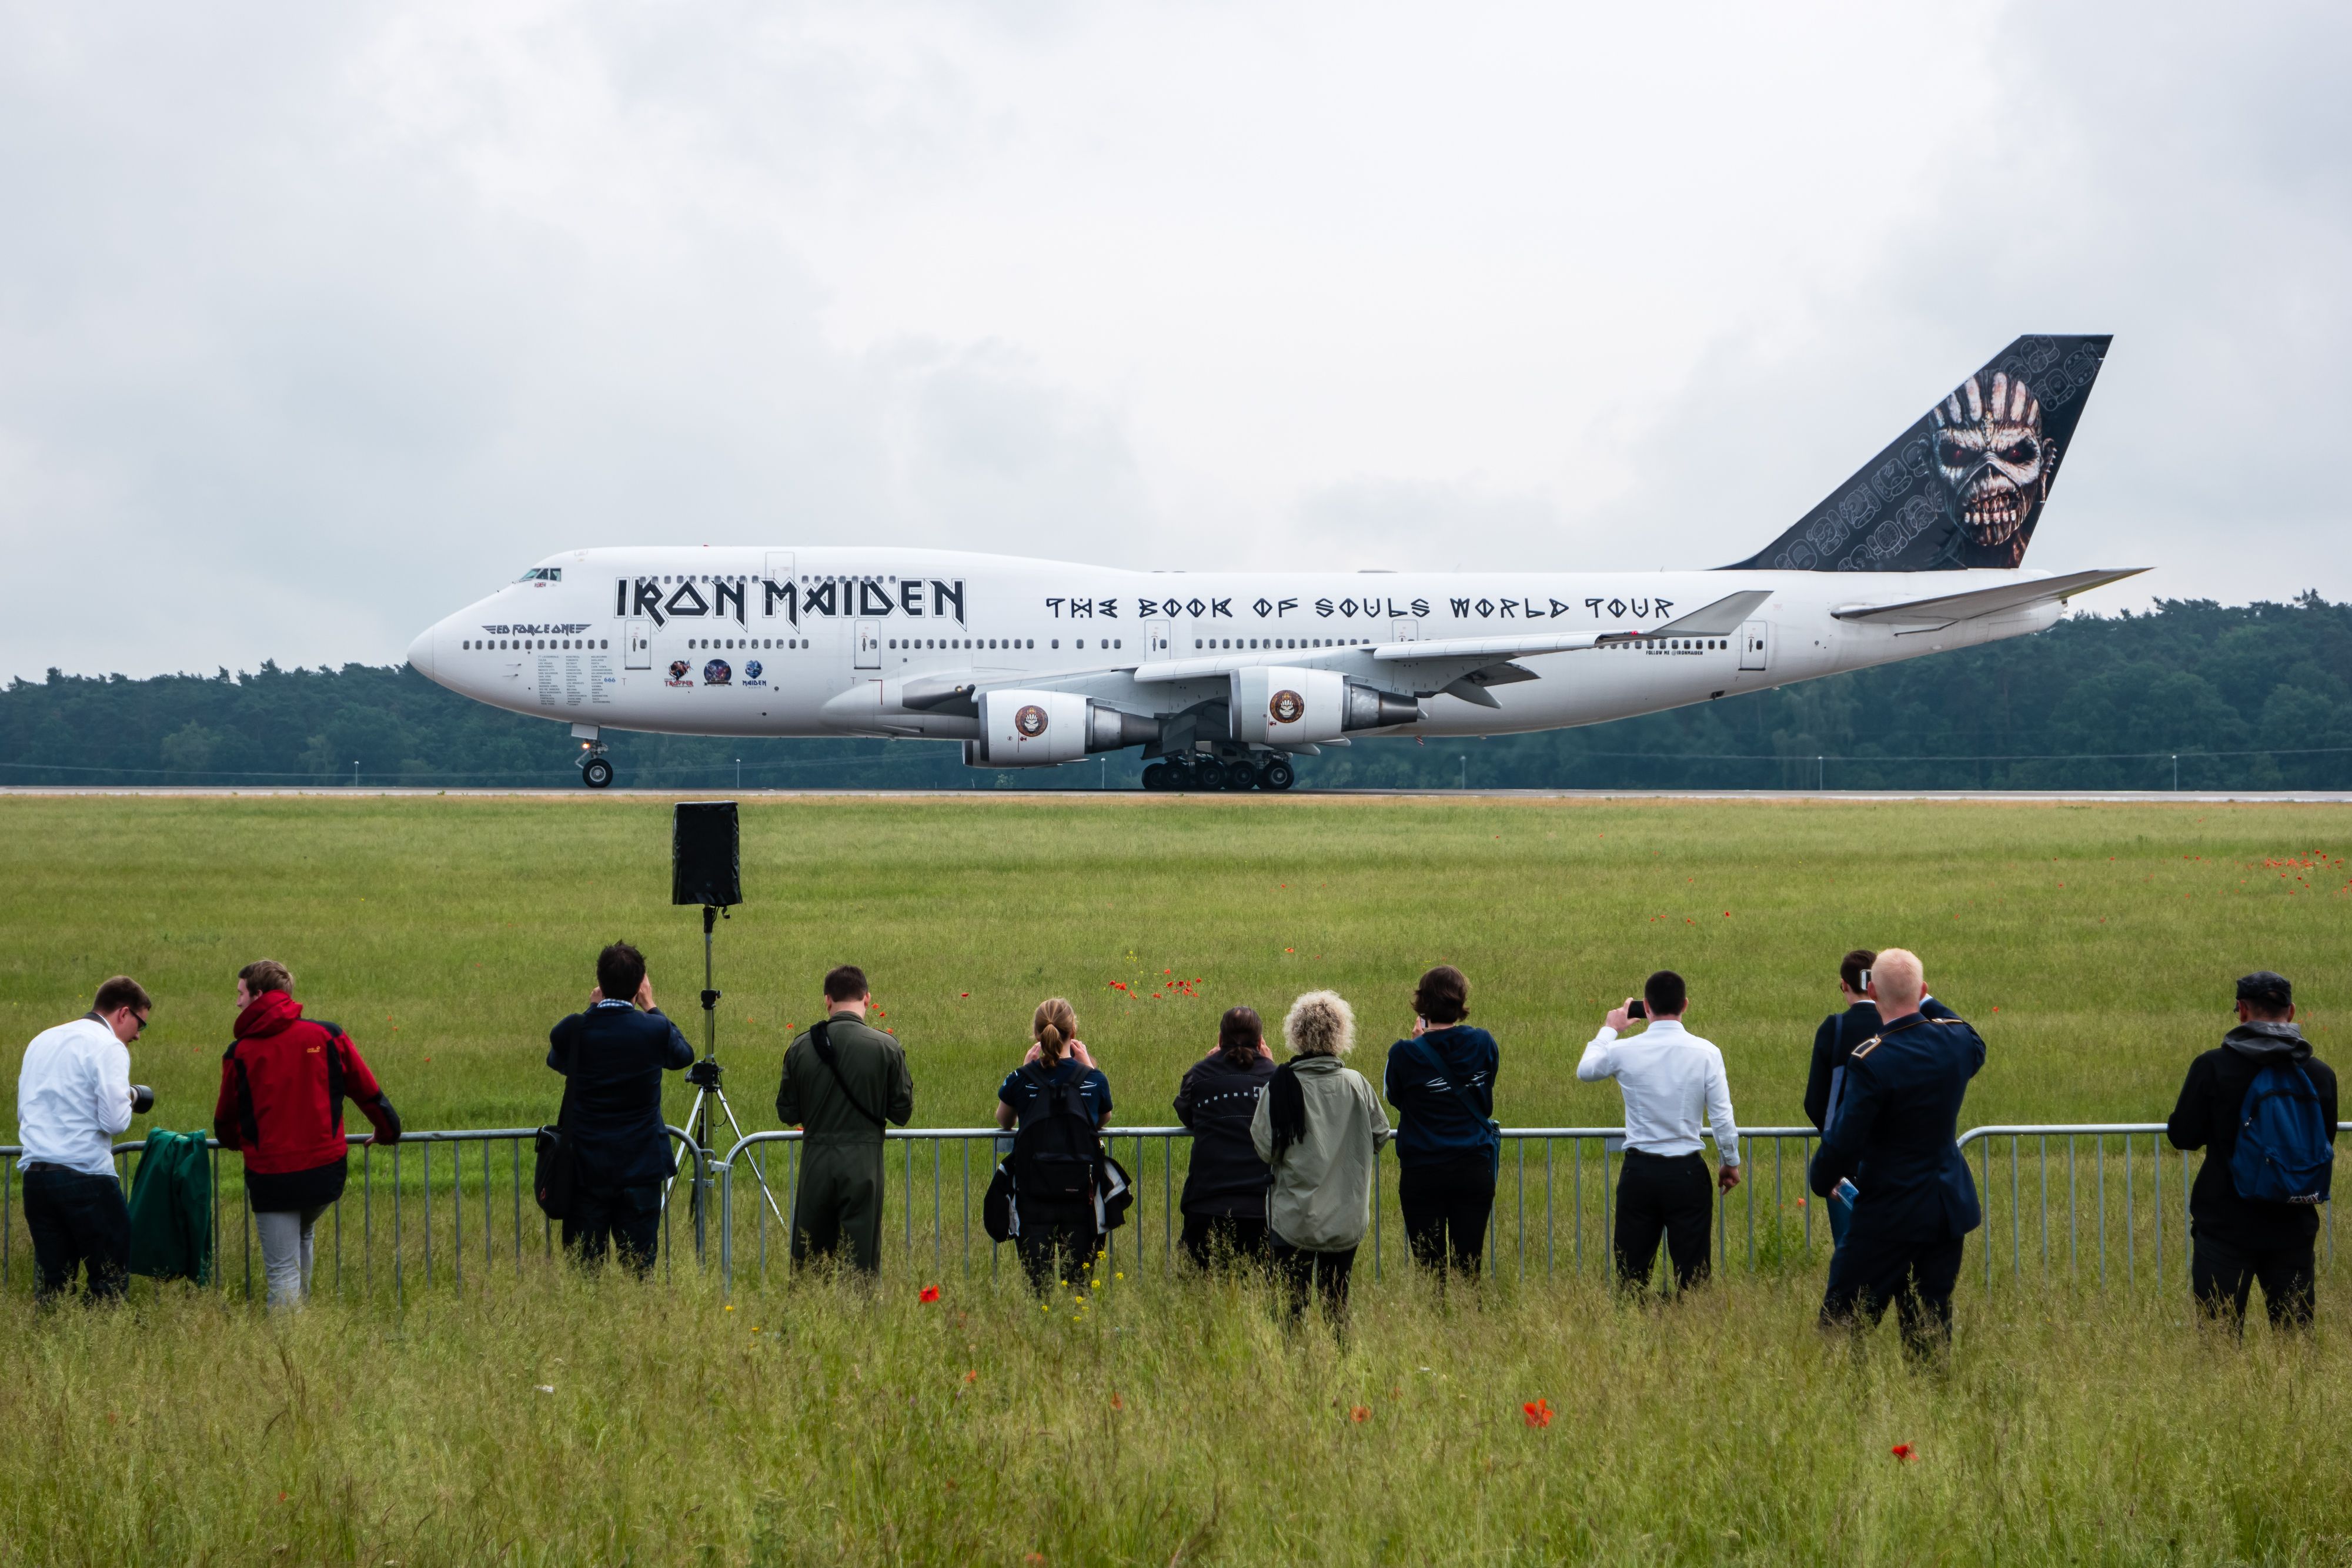 Iron Maiden's Boeing 747 Ed Force One seen in a runway in 2016 